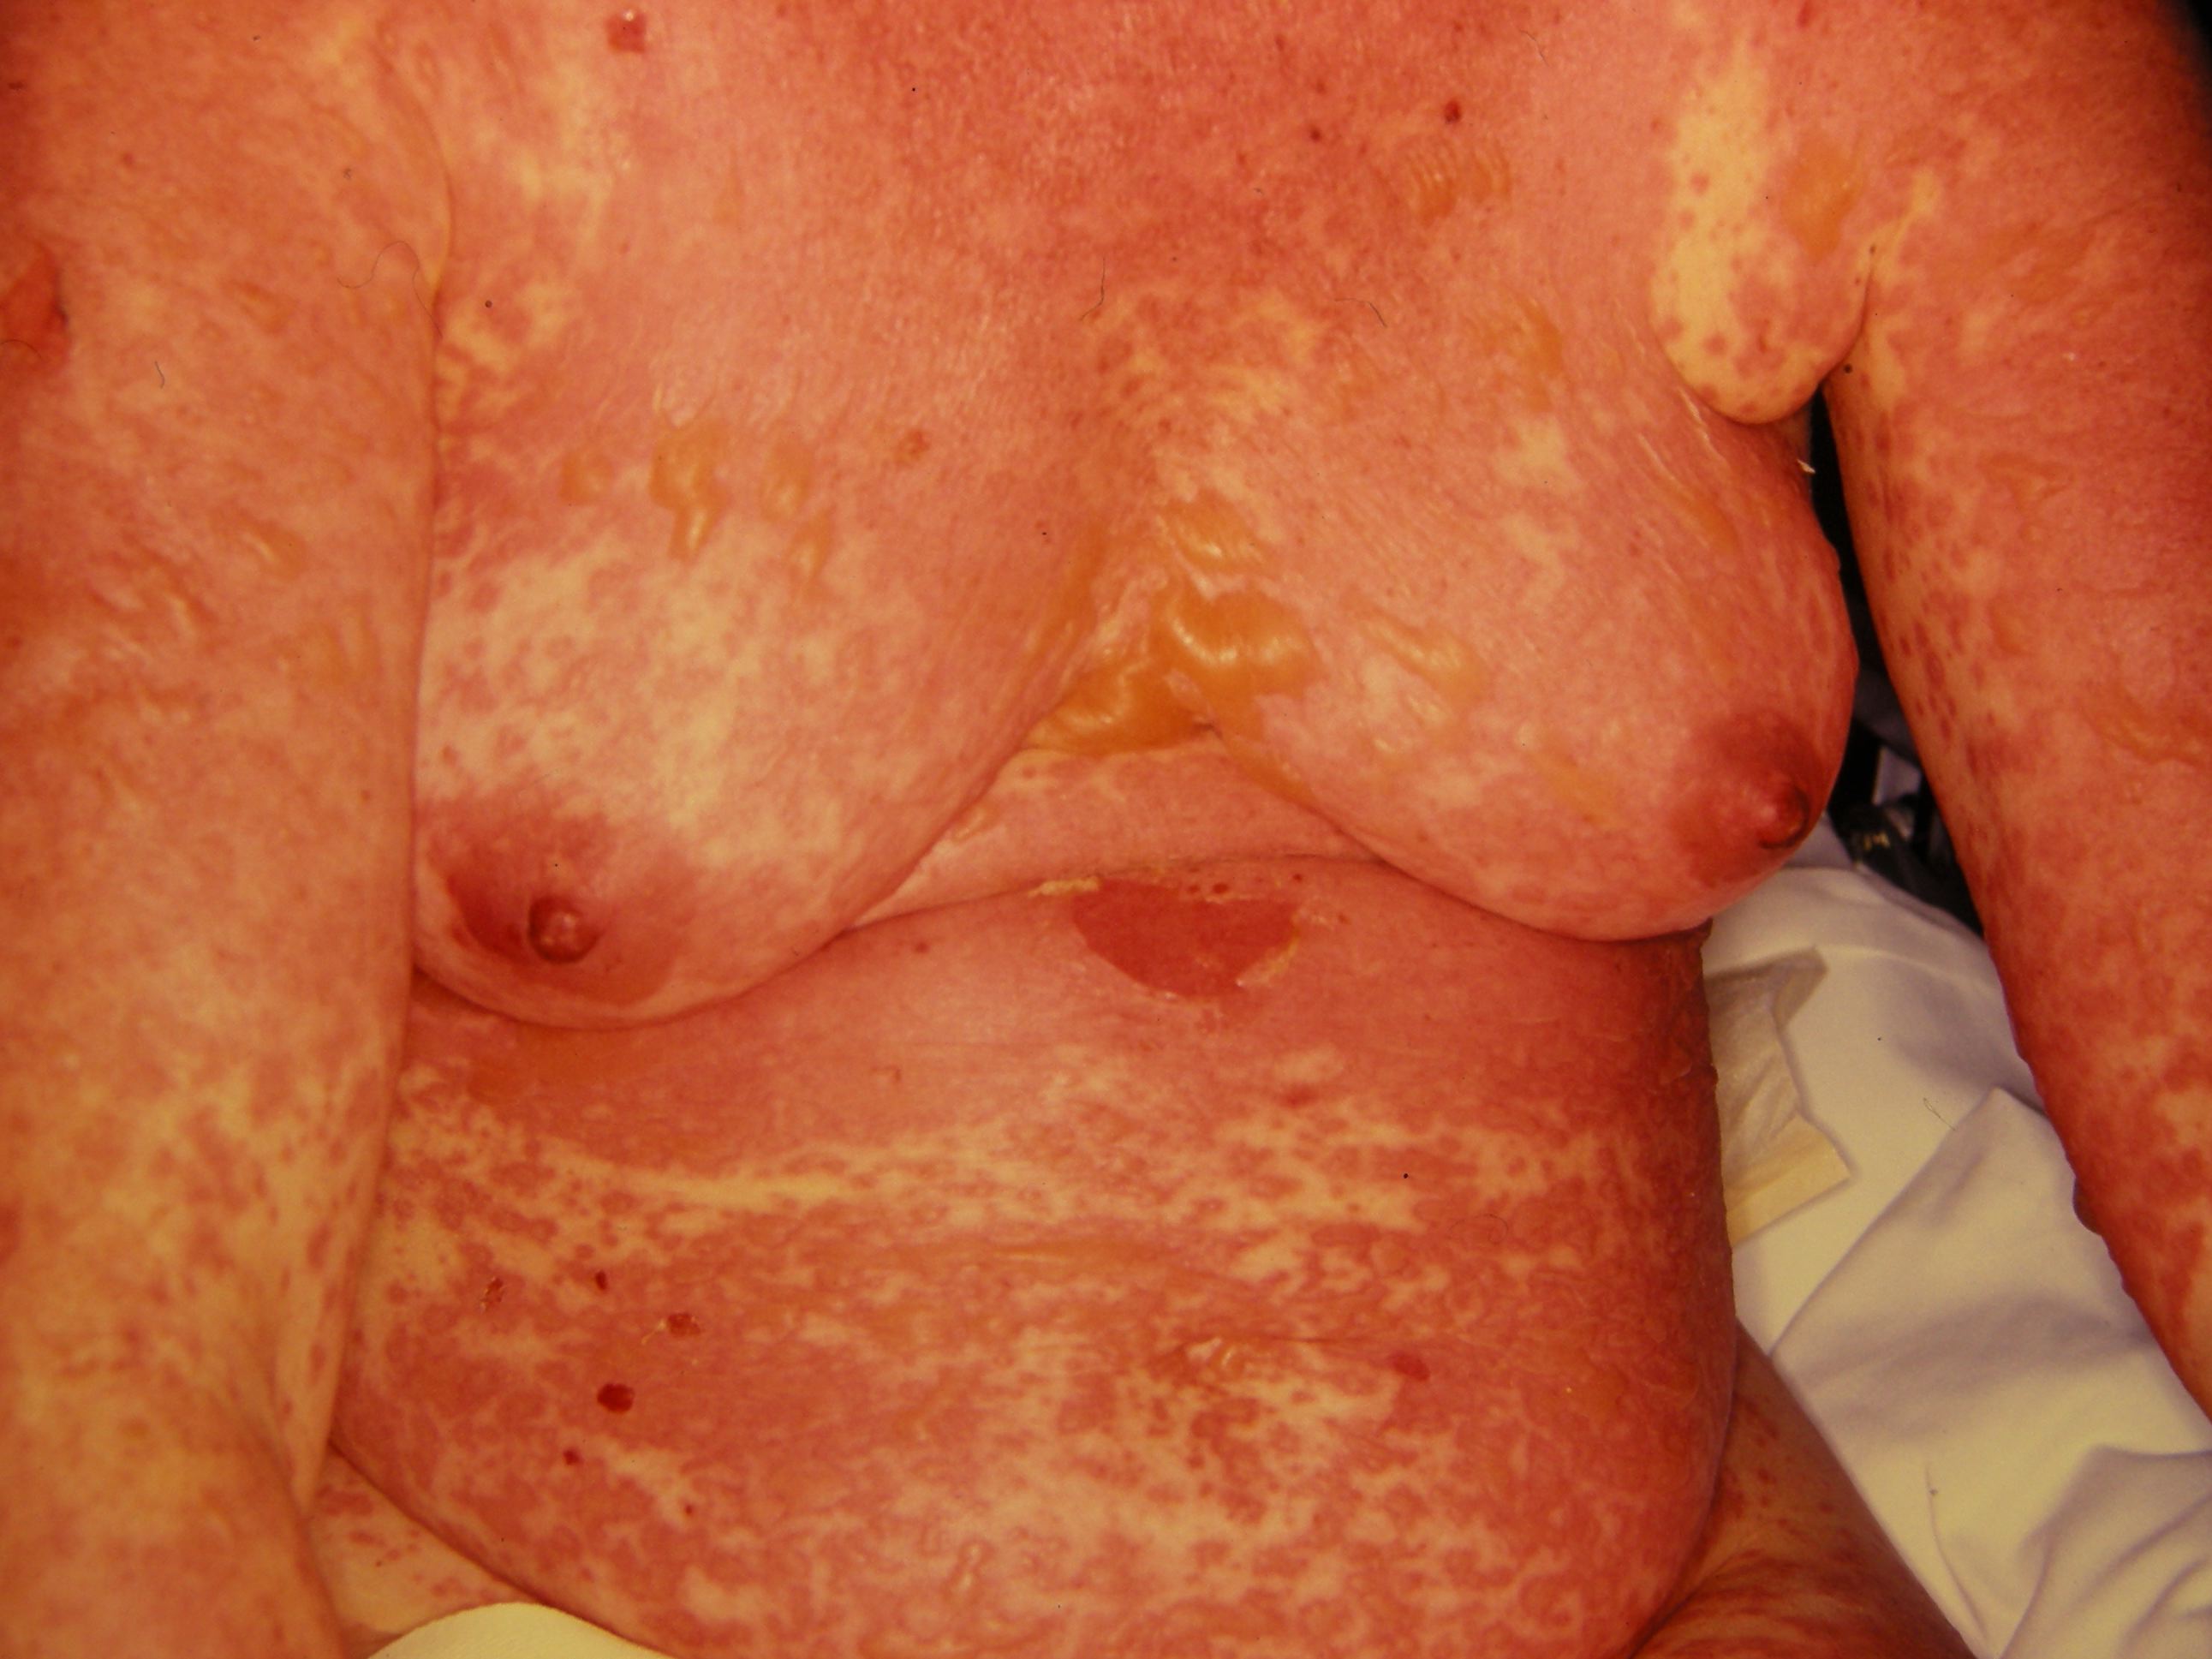 <p>Widespread early morbilliform eruption with flaccid bullae in patient with toxic epidermal necrolysis</p>